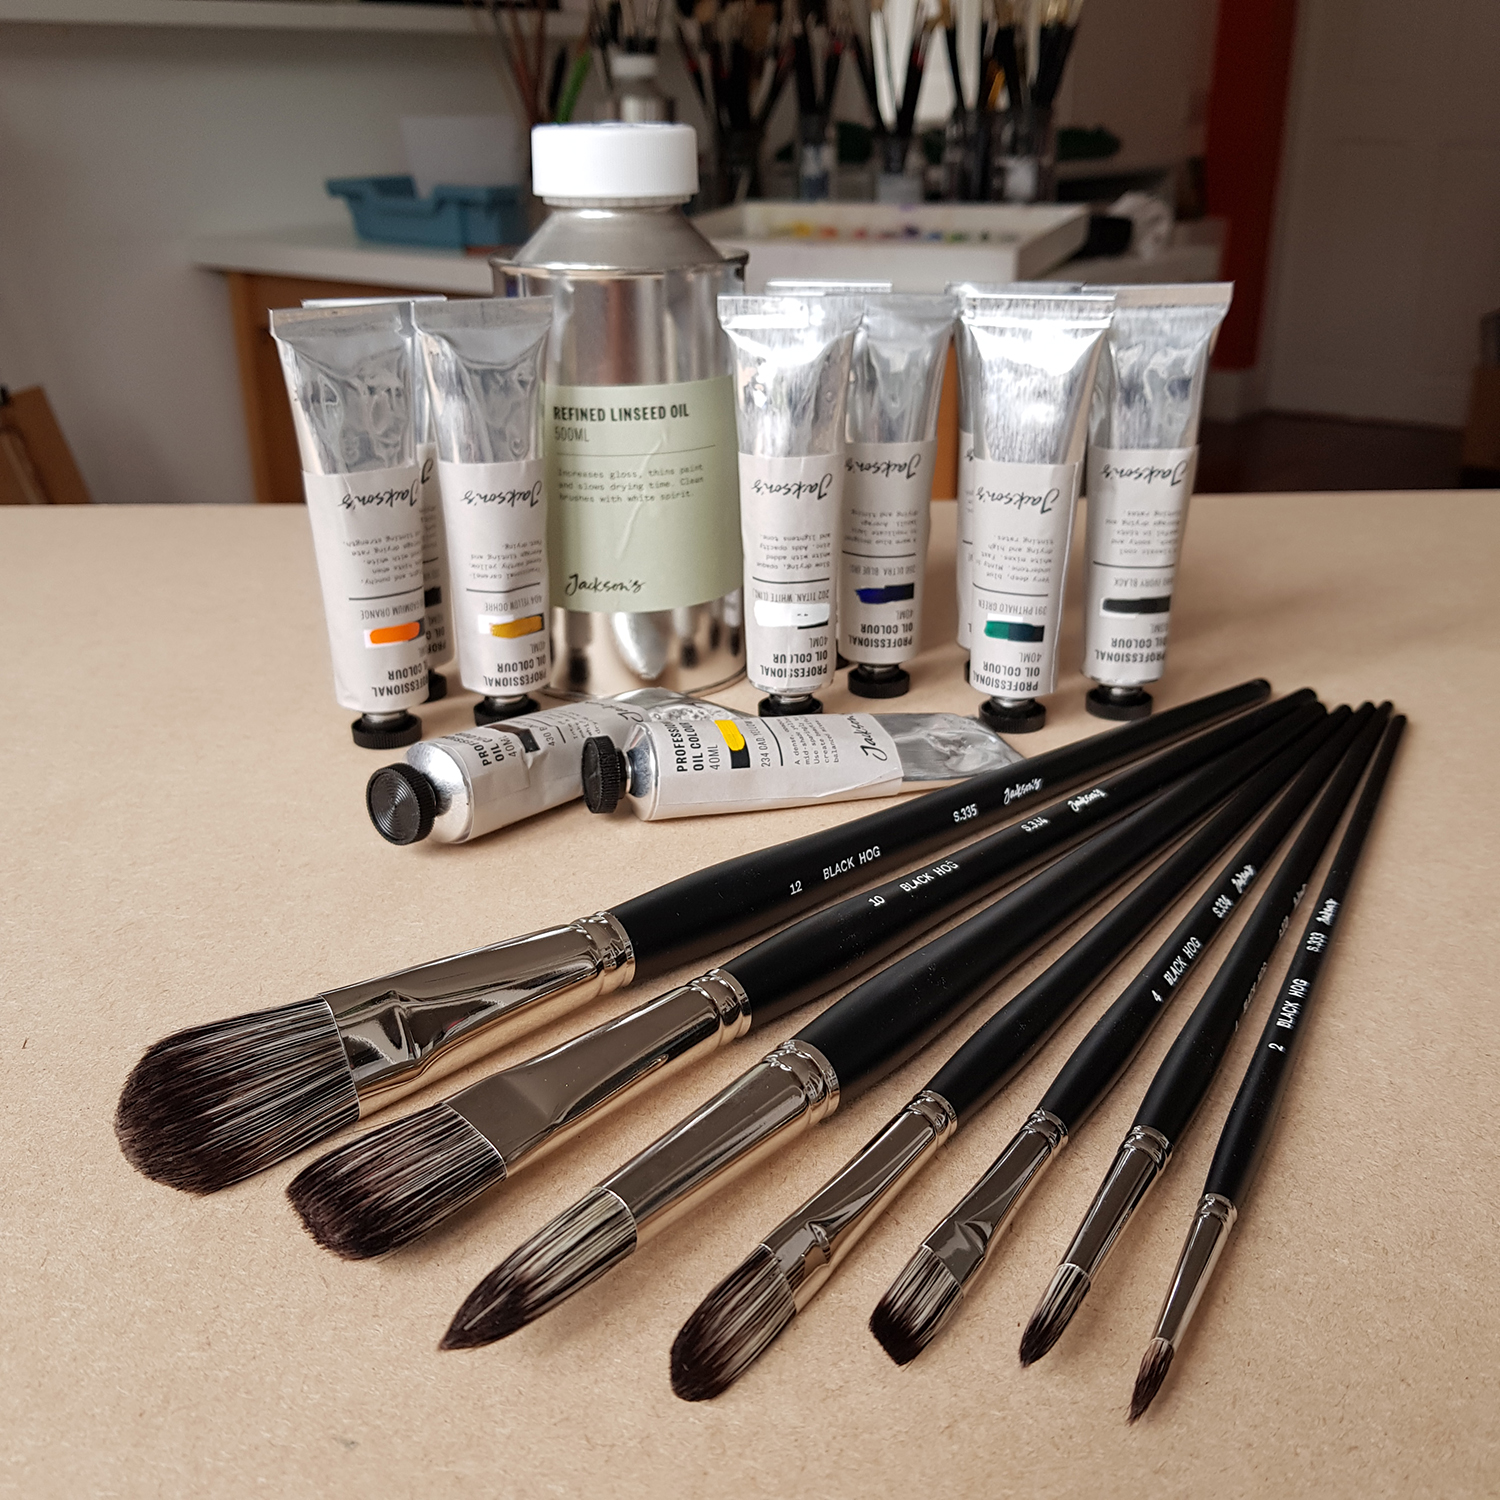 Jackson's Black Hog Brushes and Professional Oil Paint